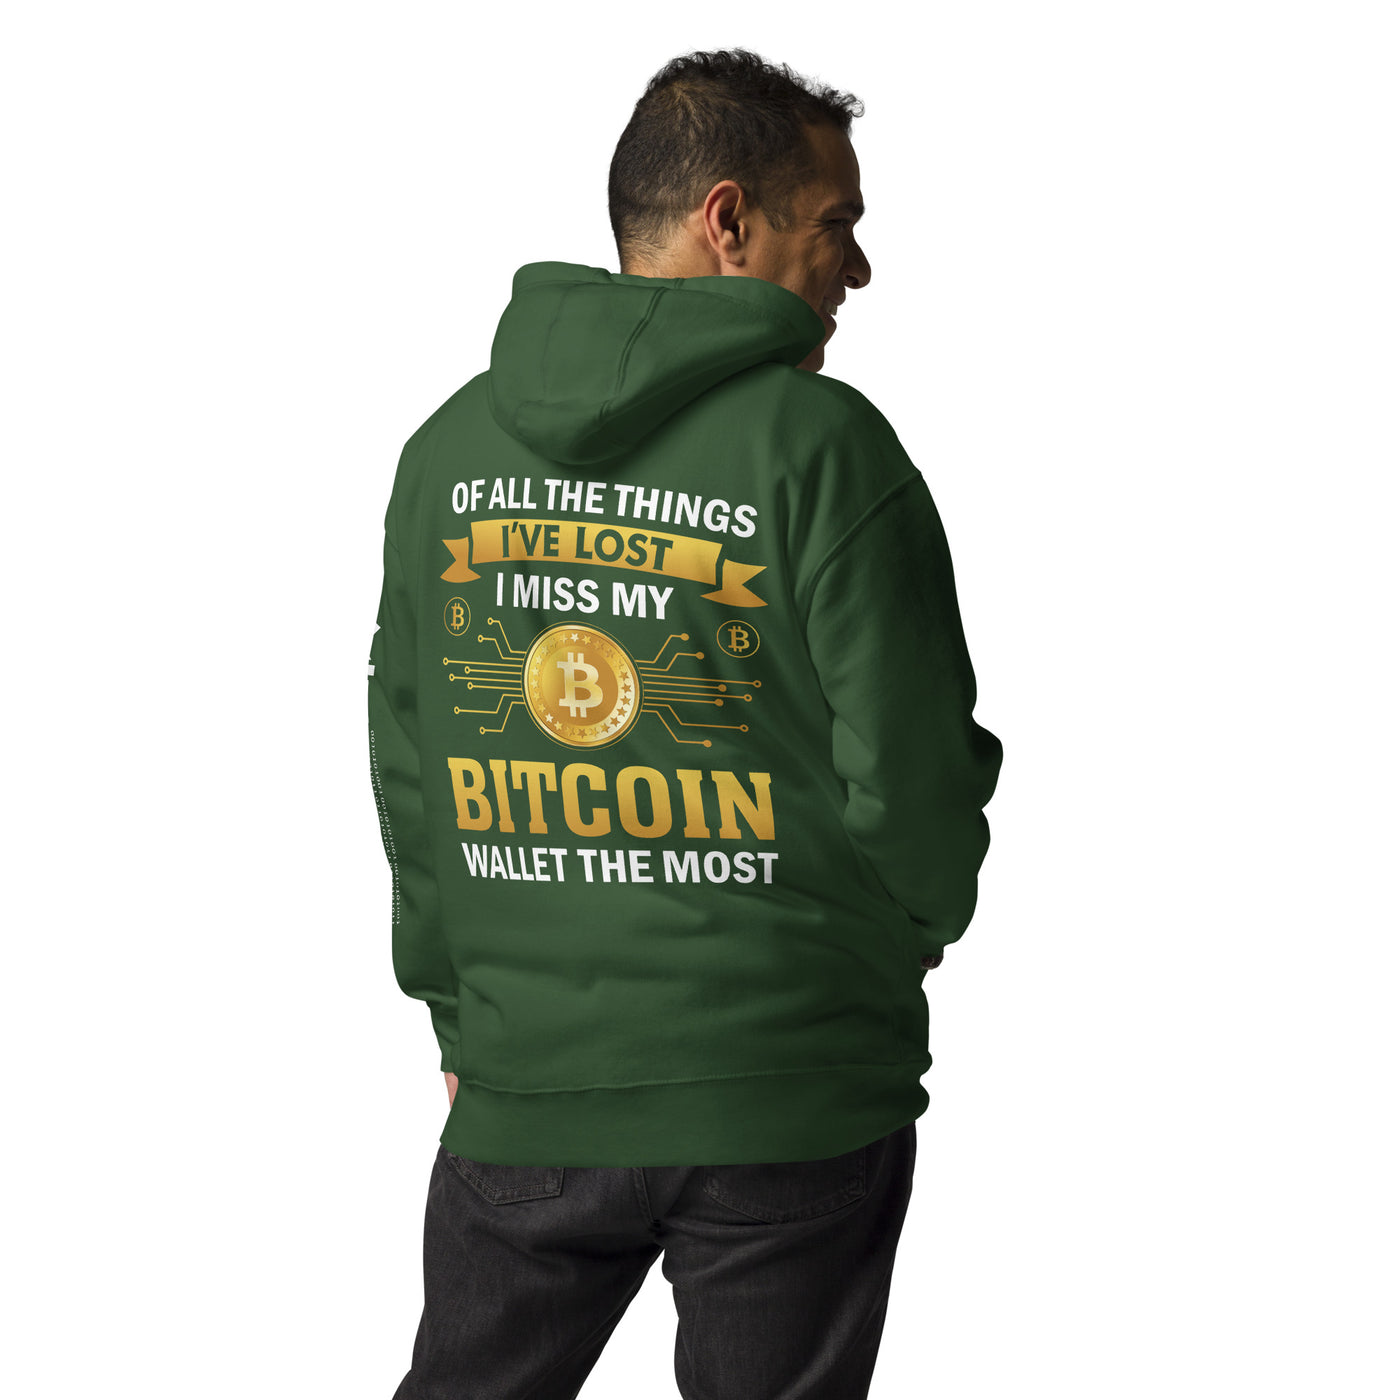 Of all the things  I've lost, I Miss my Bitcoin the most - Unisex Hoodie ( Back Print )